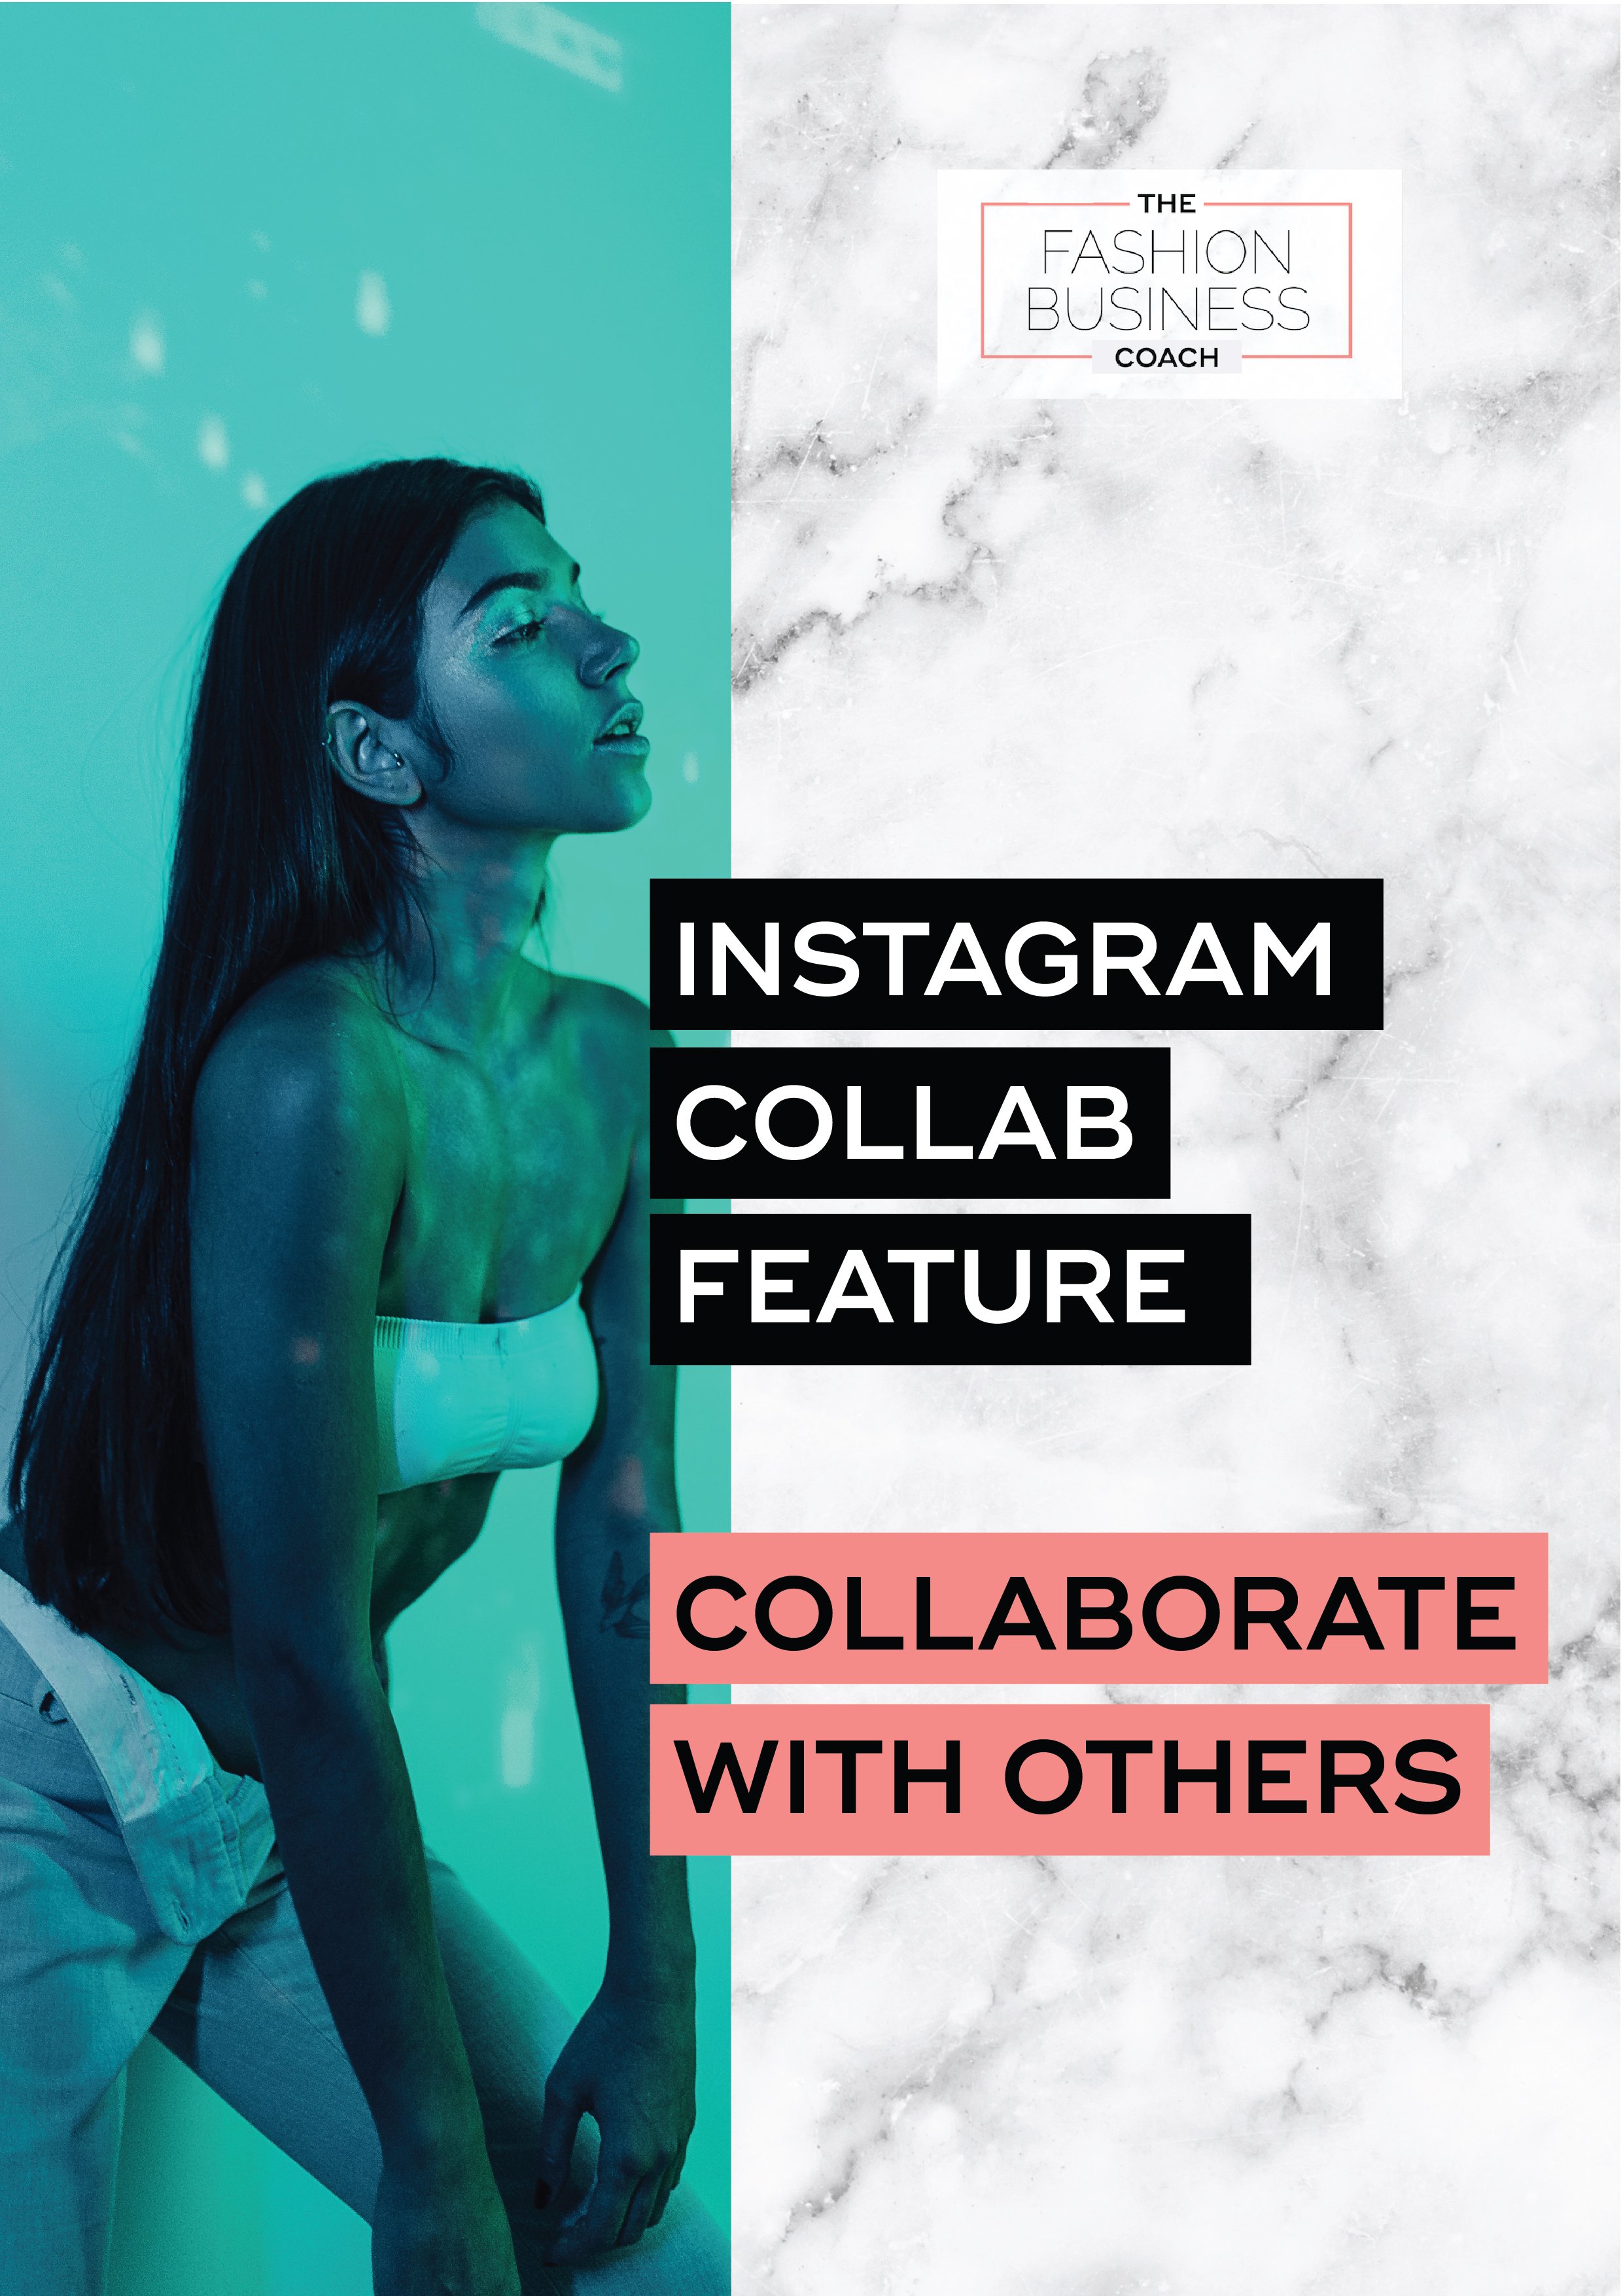 Instagram Collab Feature Collaborate With Others 1.jpg